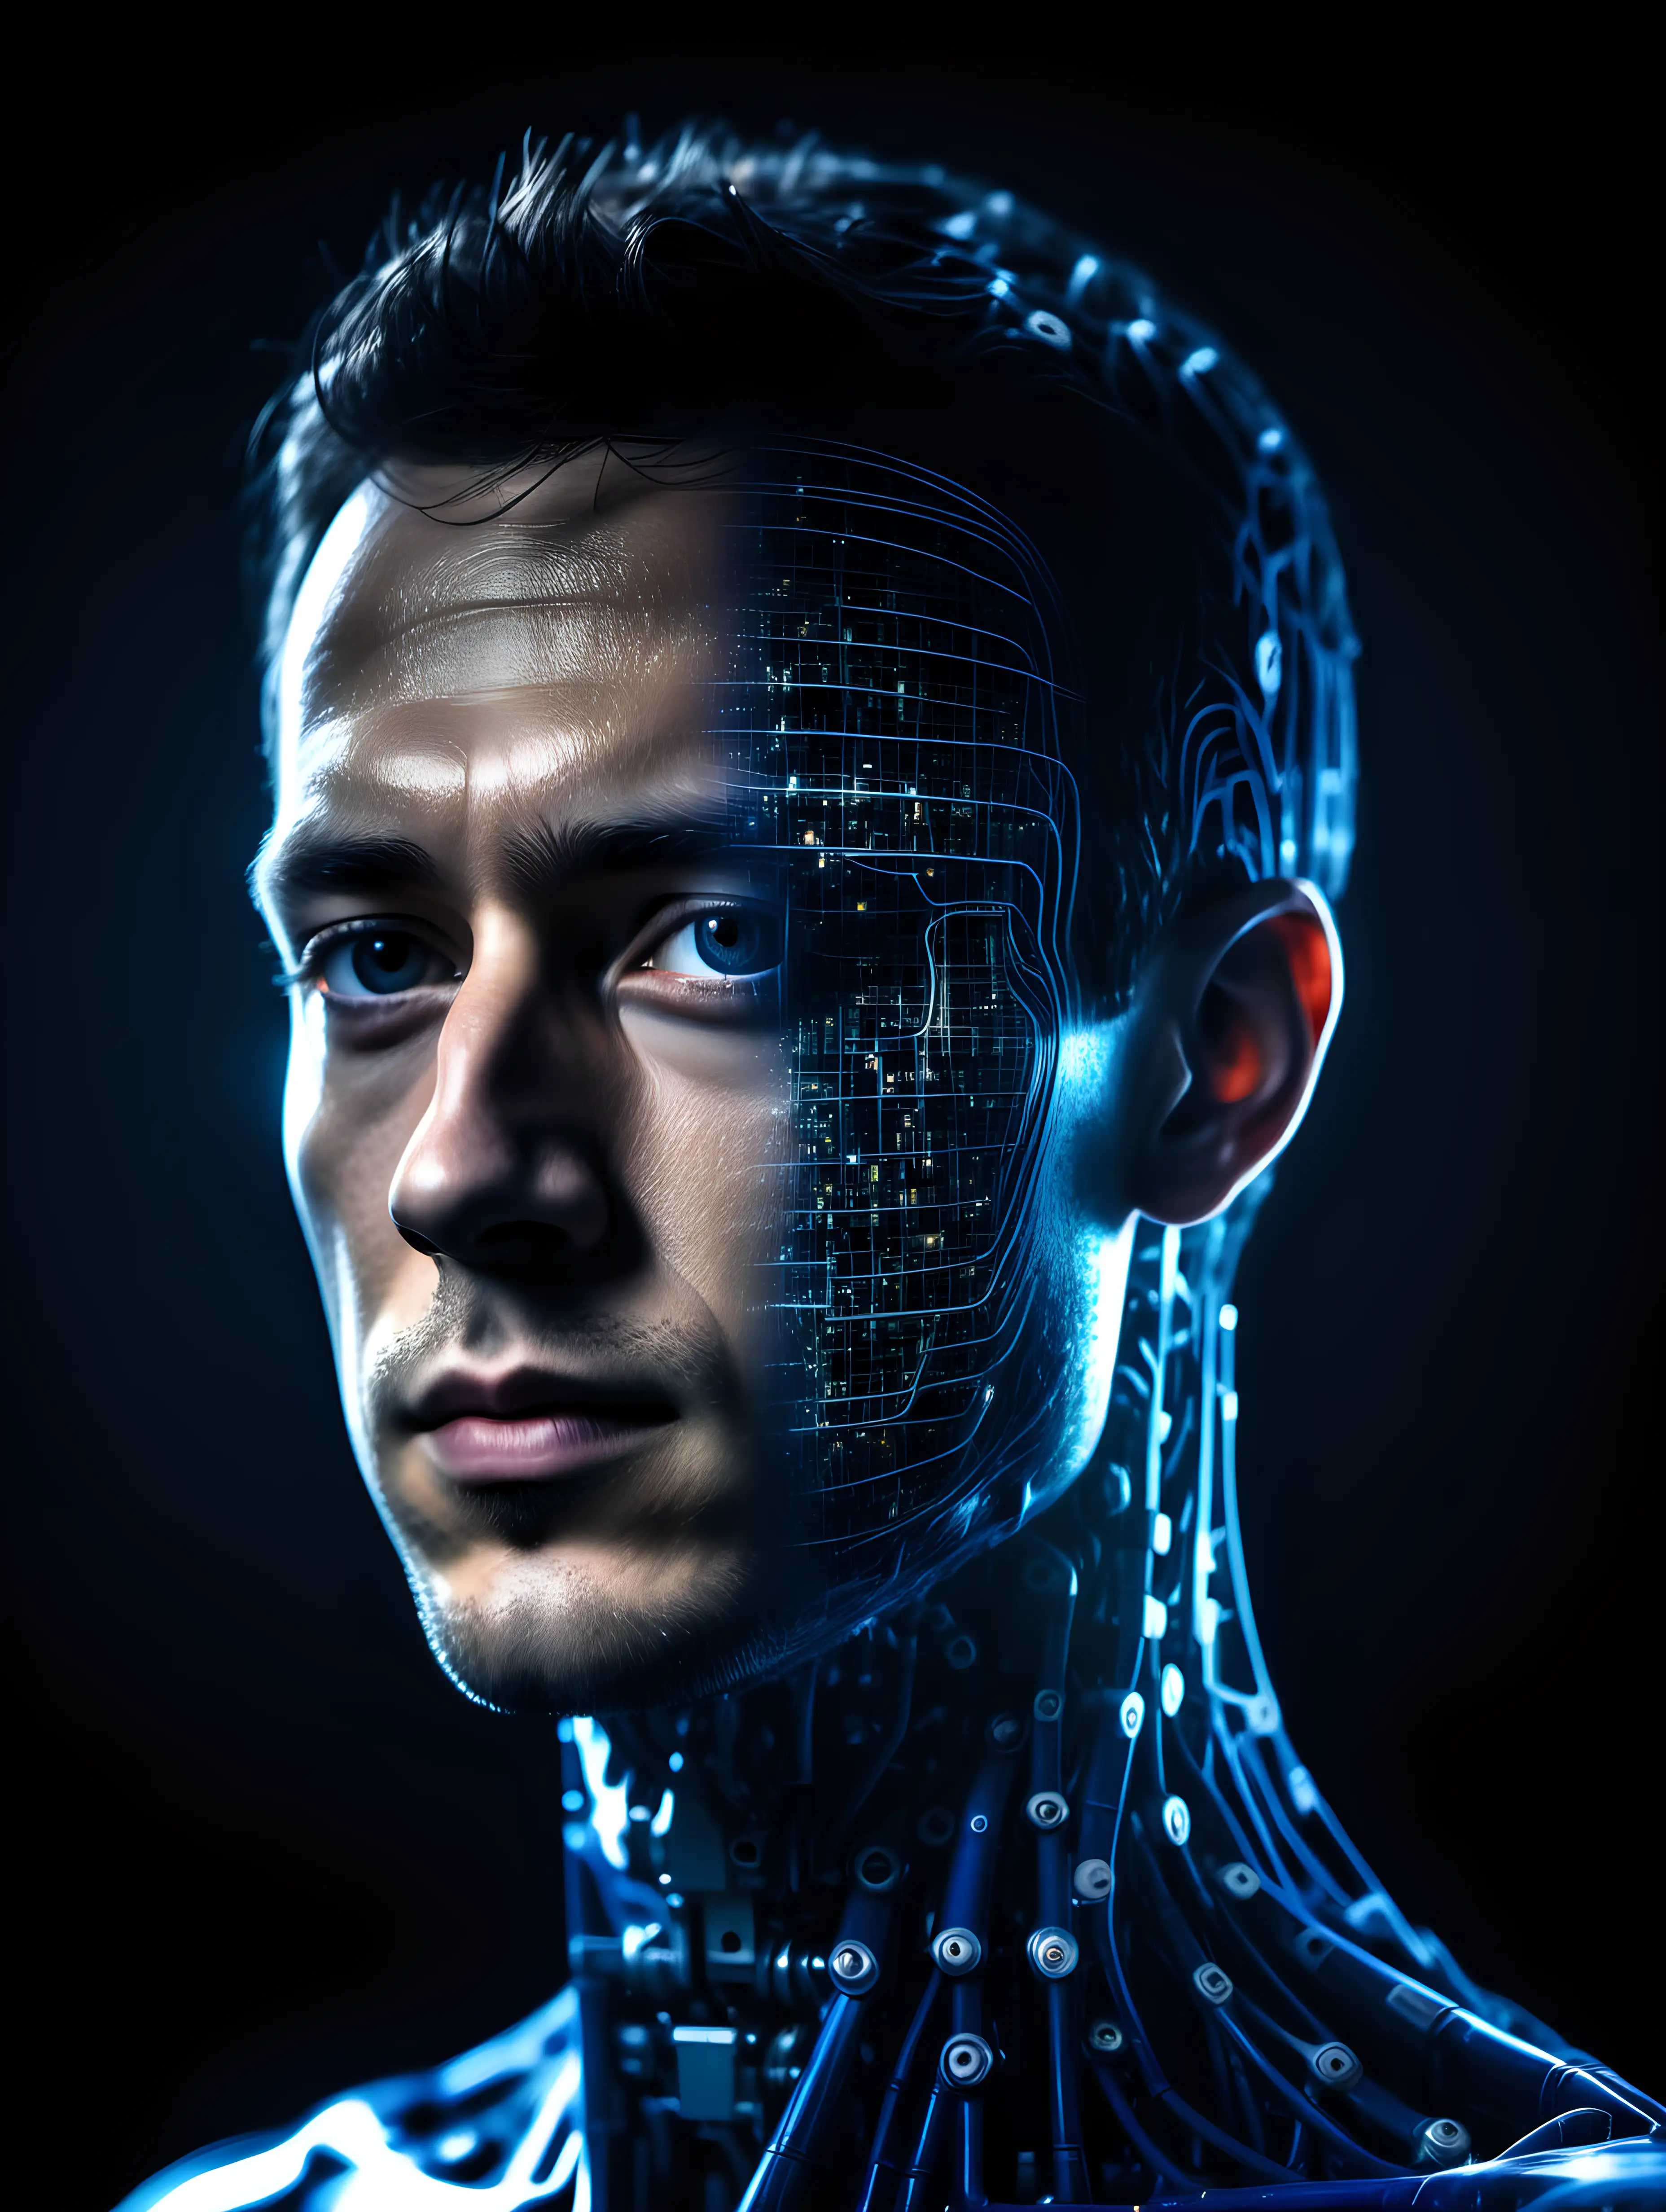 professional photo with slight reflection. dark background. dark blue high tech waves of neural network in bottom and double exposure nice man 20 years old human head half robot half human westworld style uhd 8k realistic detailed bit of matrix style 